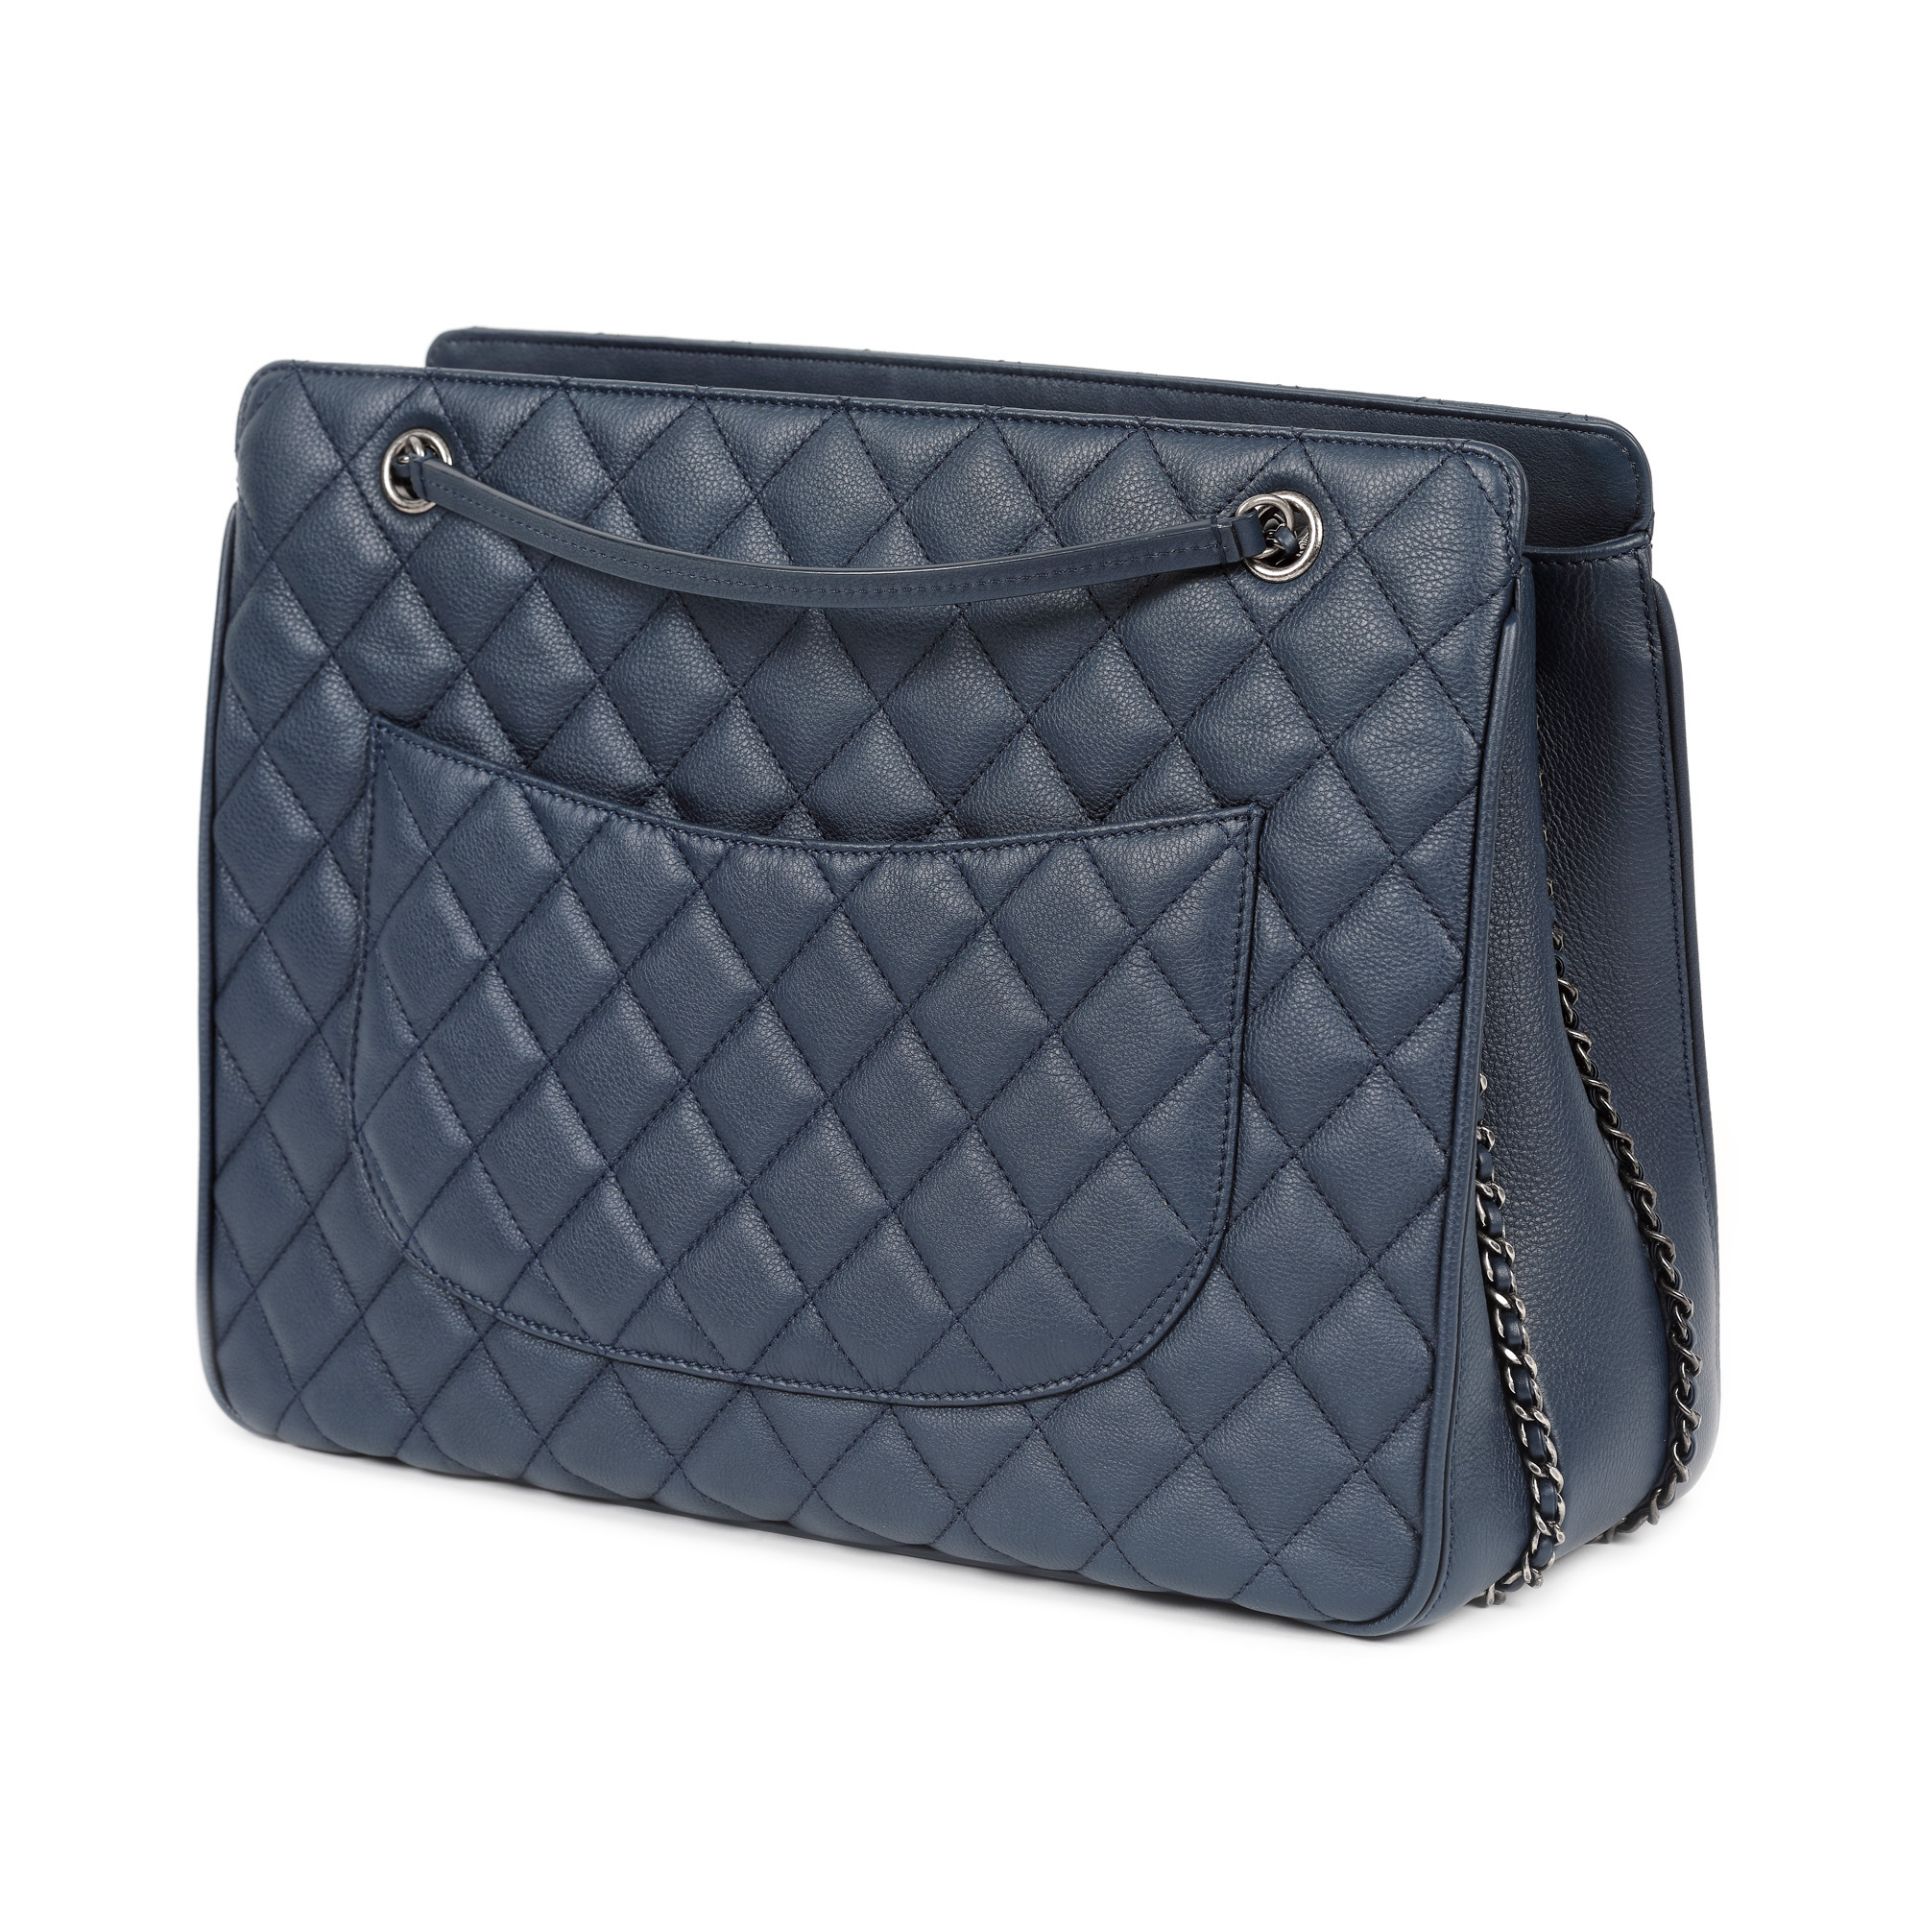 Chanel bag, quilted leather, blue, authenticity card and original cover - Image 5 of 5